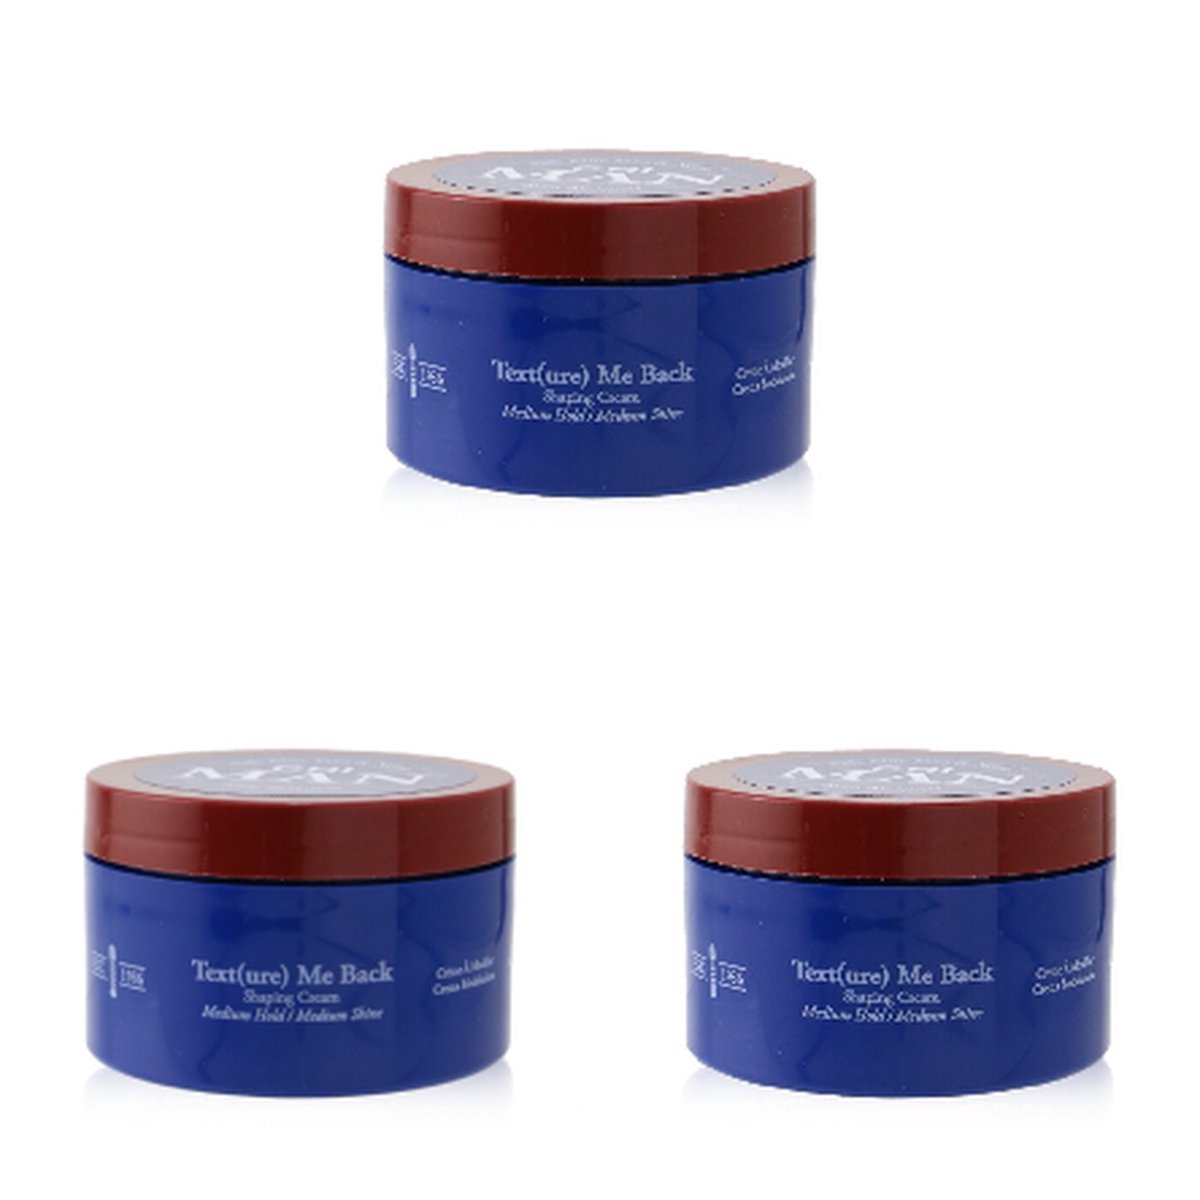 CHI MAN - Texture Me Back Shaping Cream - 3 x 85gr